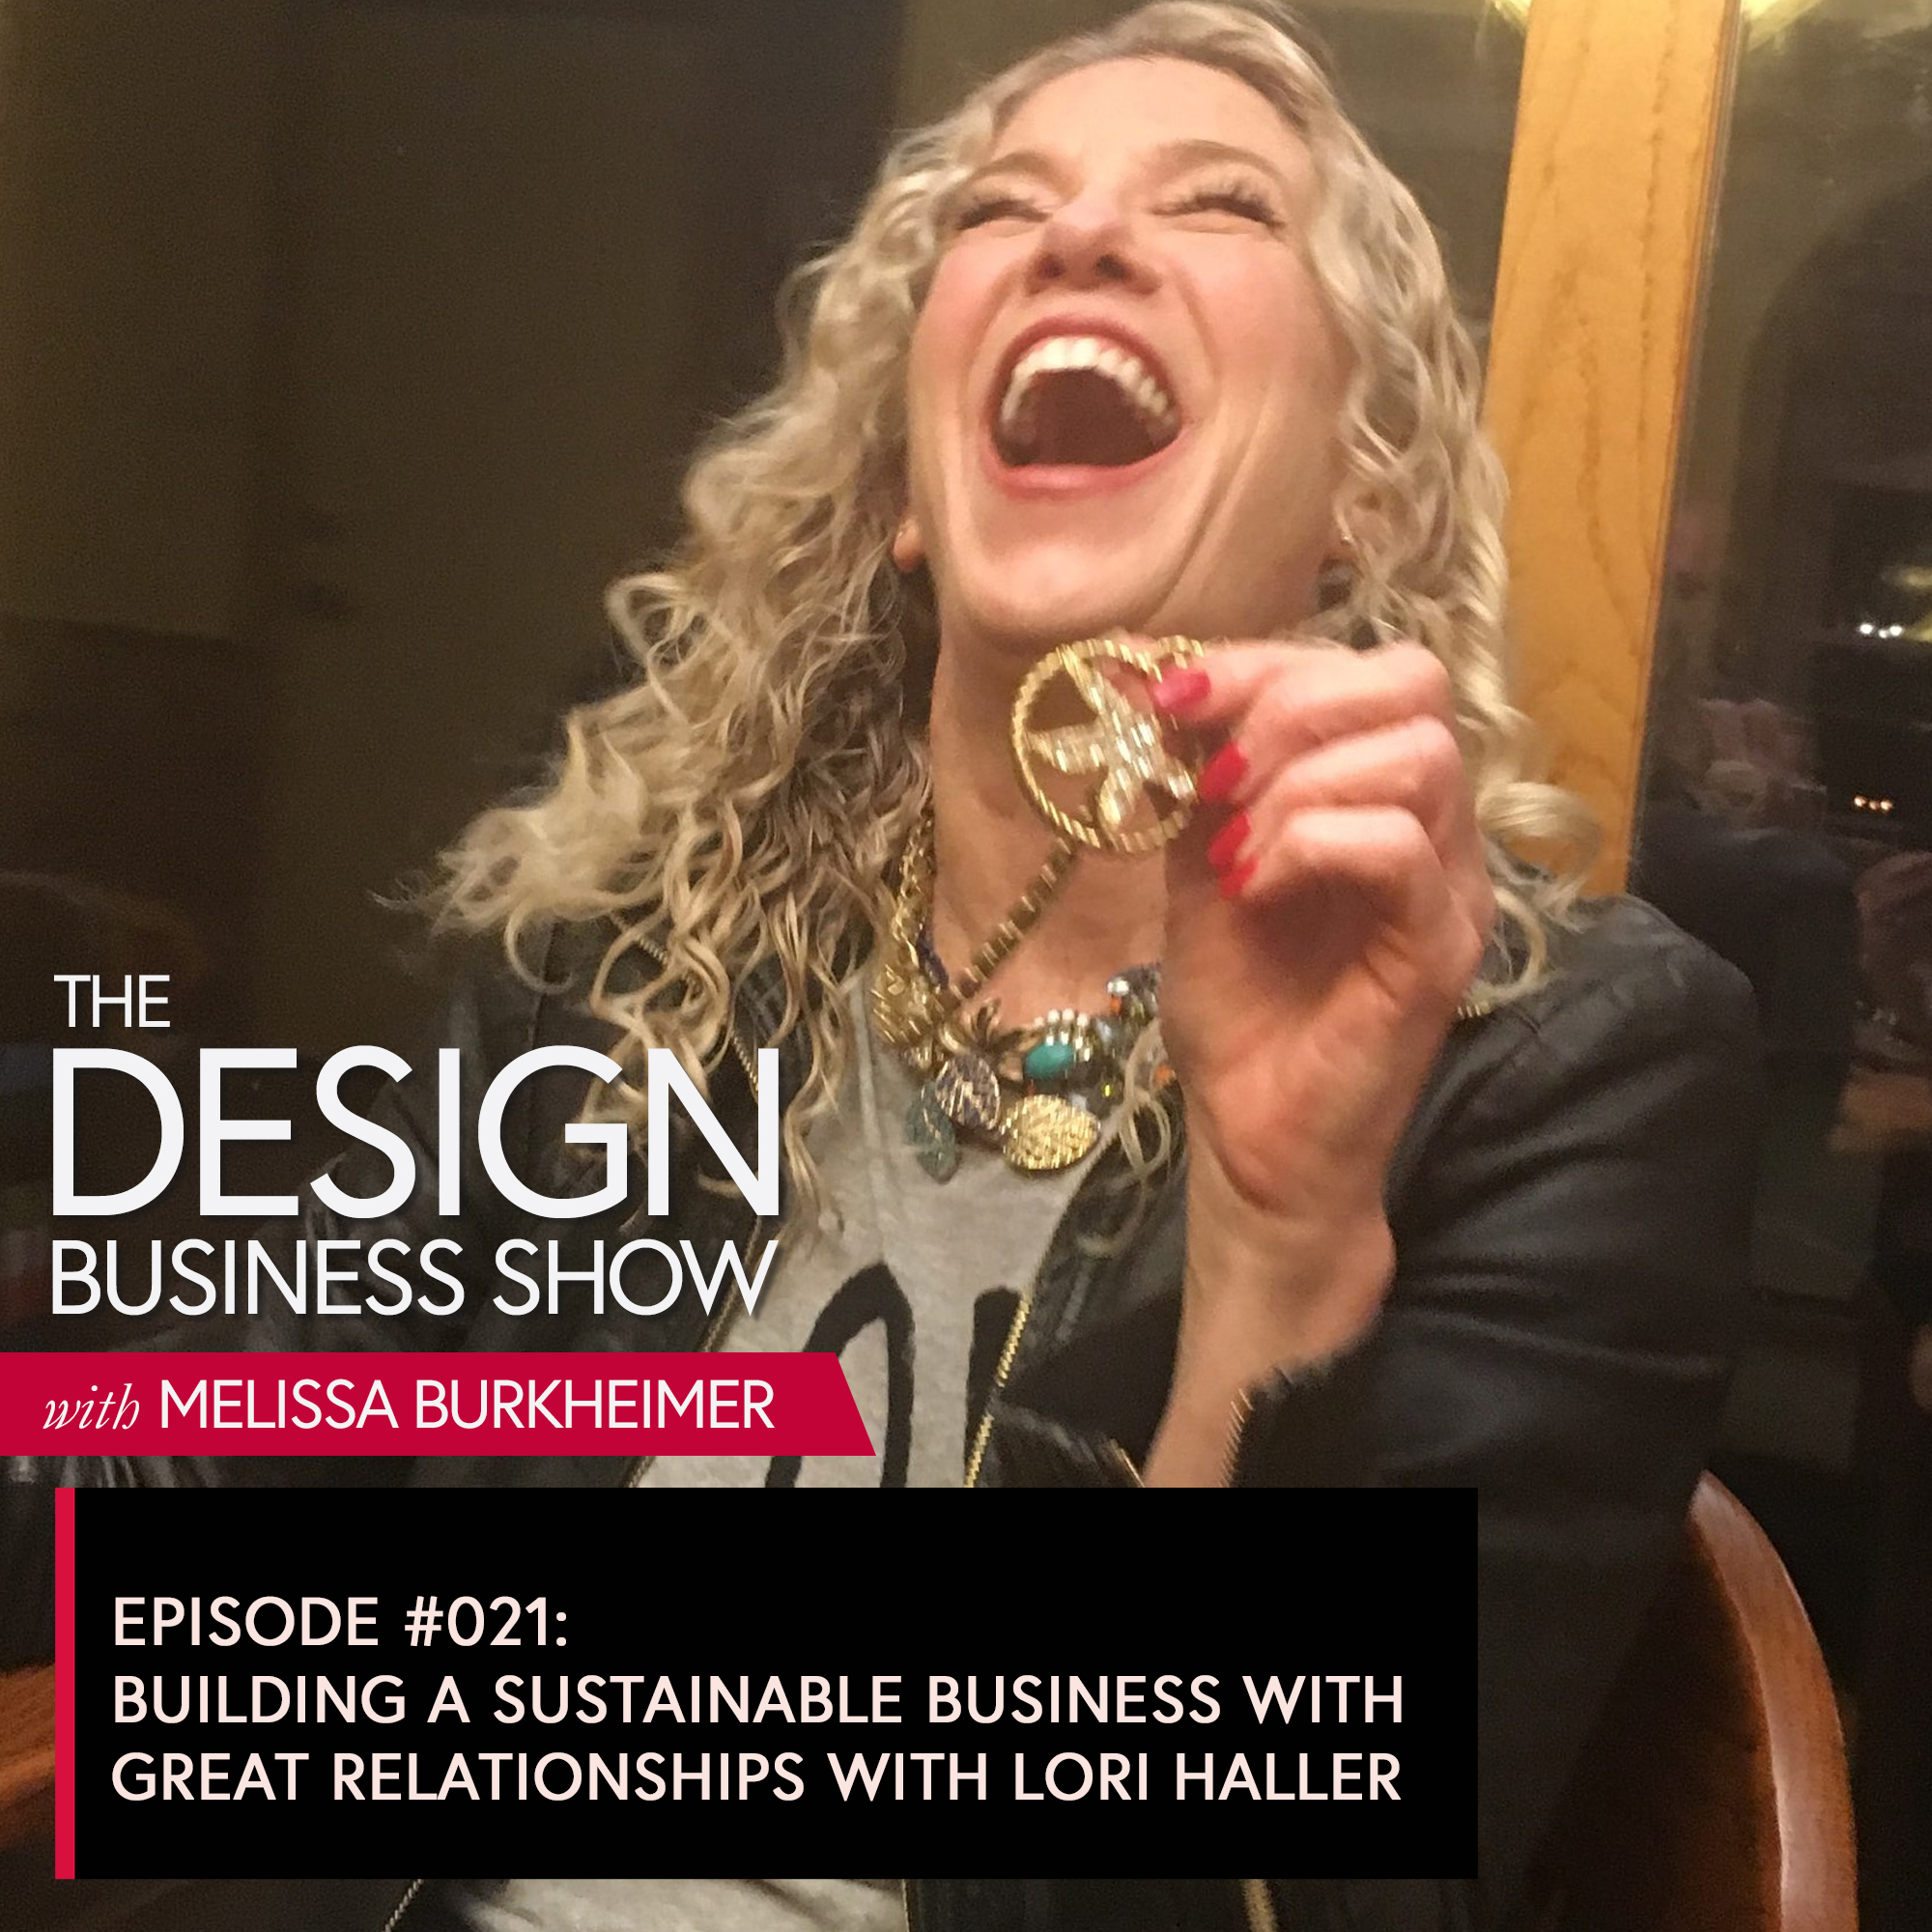 Lori Haller is a highly sought after designer who has worked with advertising royalty and never says no to a project. Learn how building strong relationships has been the key to her long-term business success